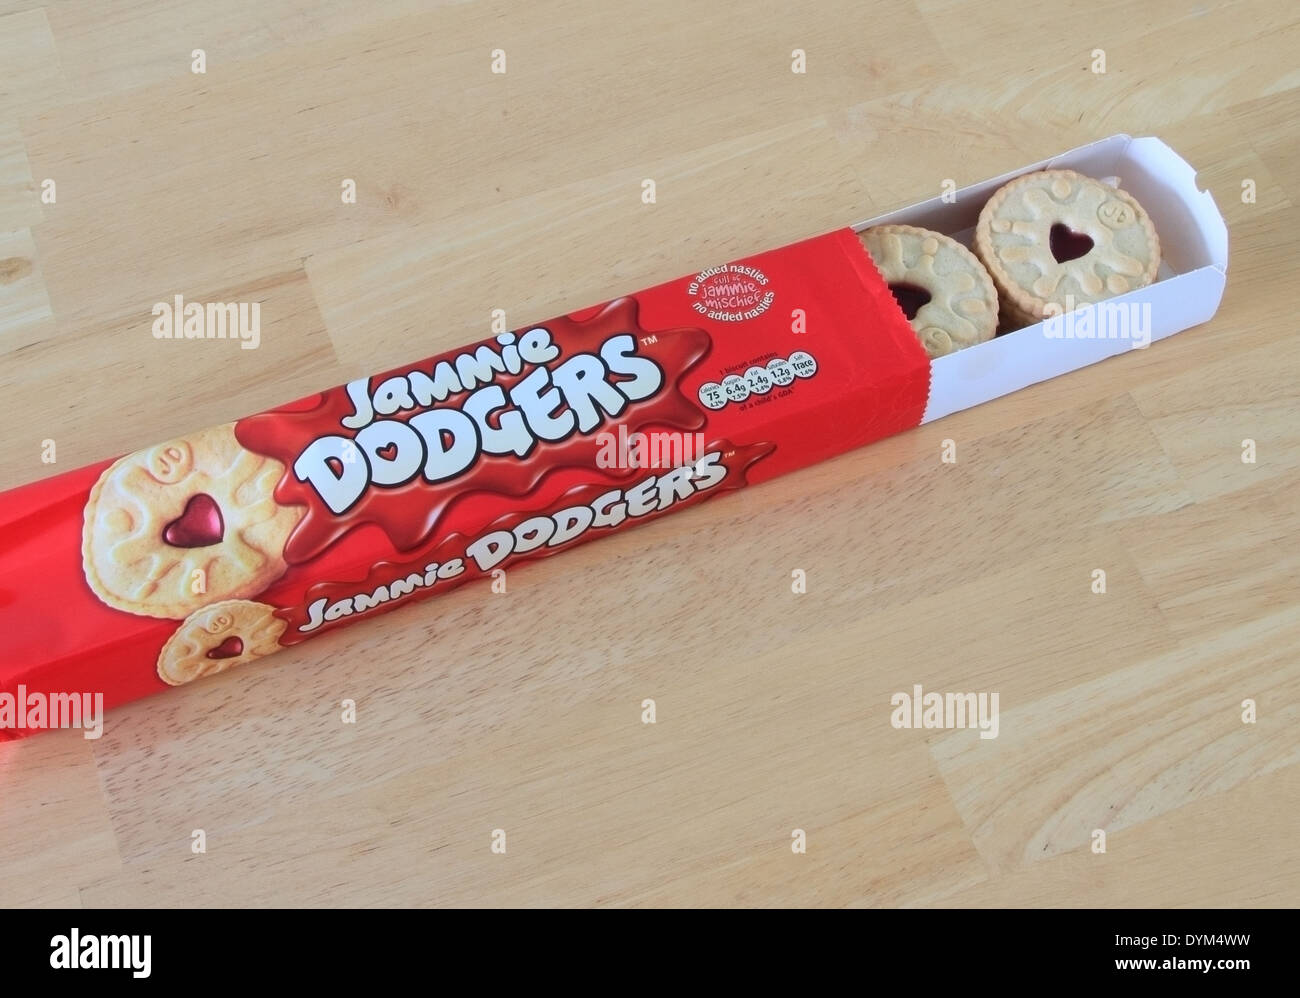 Packet of Jammie Dodgers Biscuits on a Wooden Background, UK Stock Photo